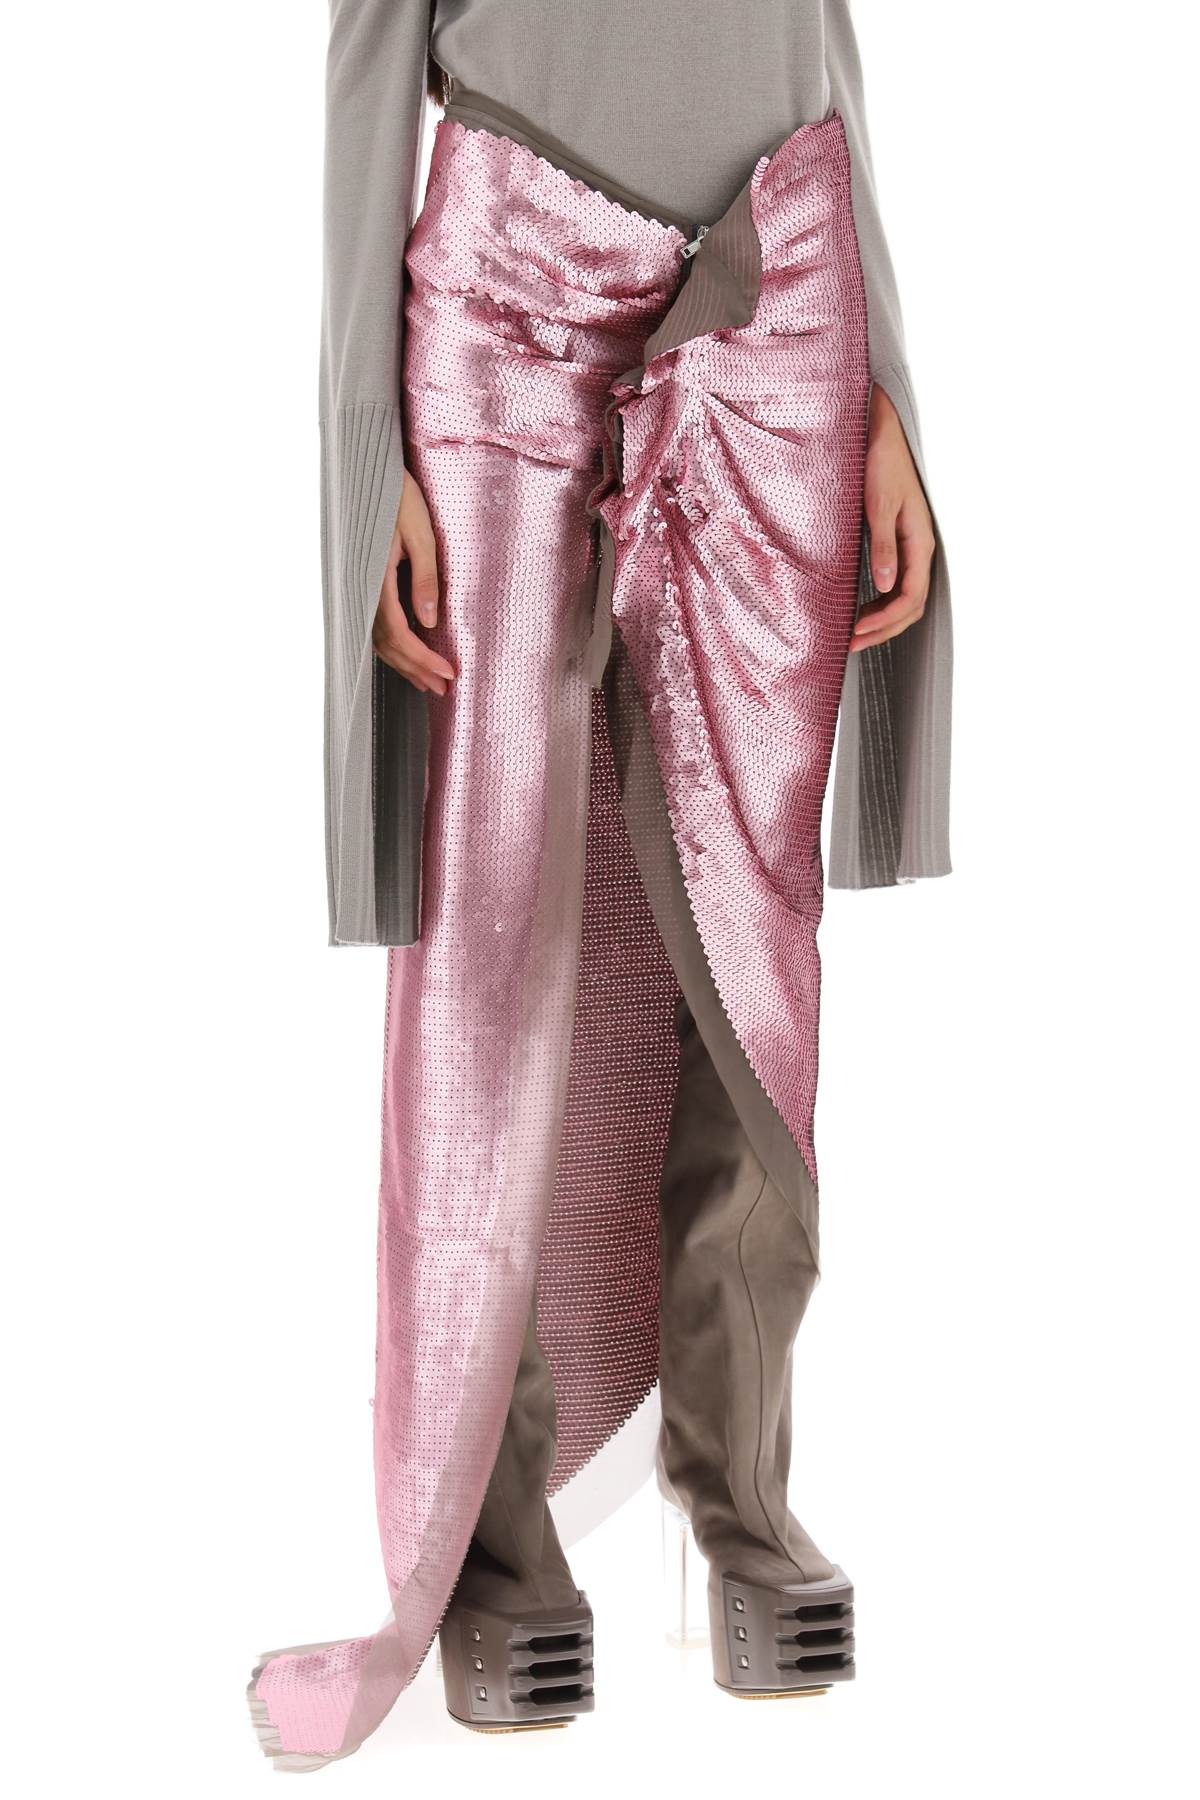 RICK OWENS Festive Silk Skirt in Pink and Purple for Women - FW23